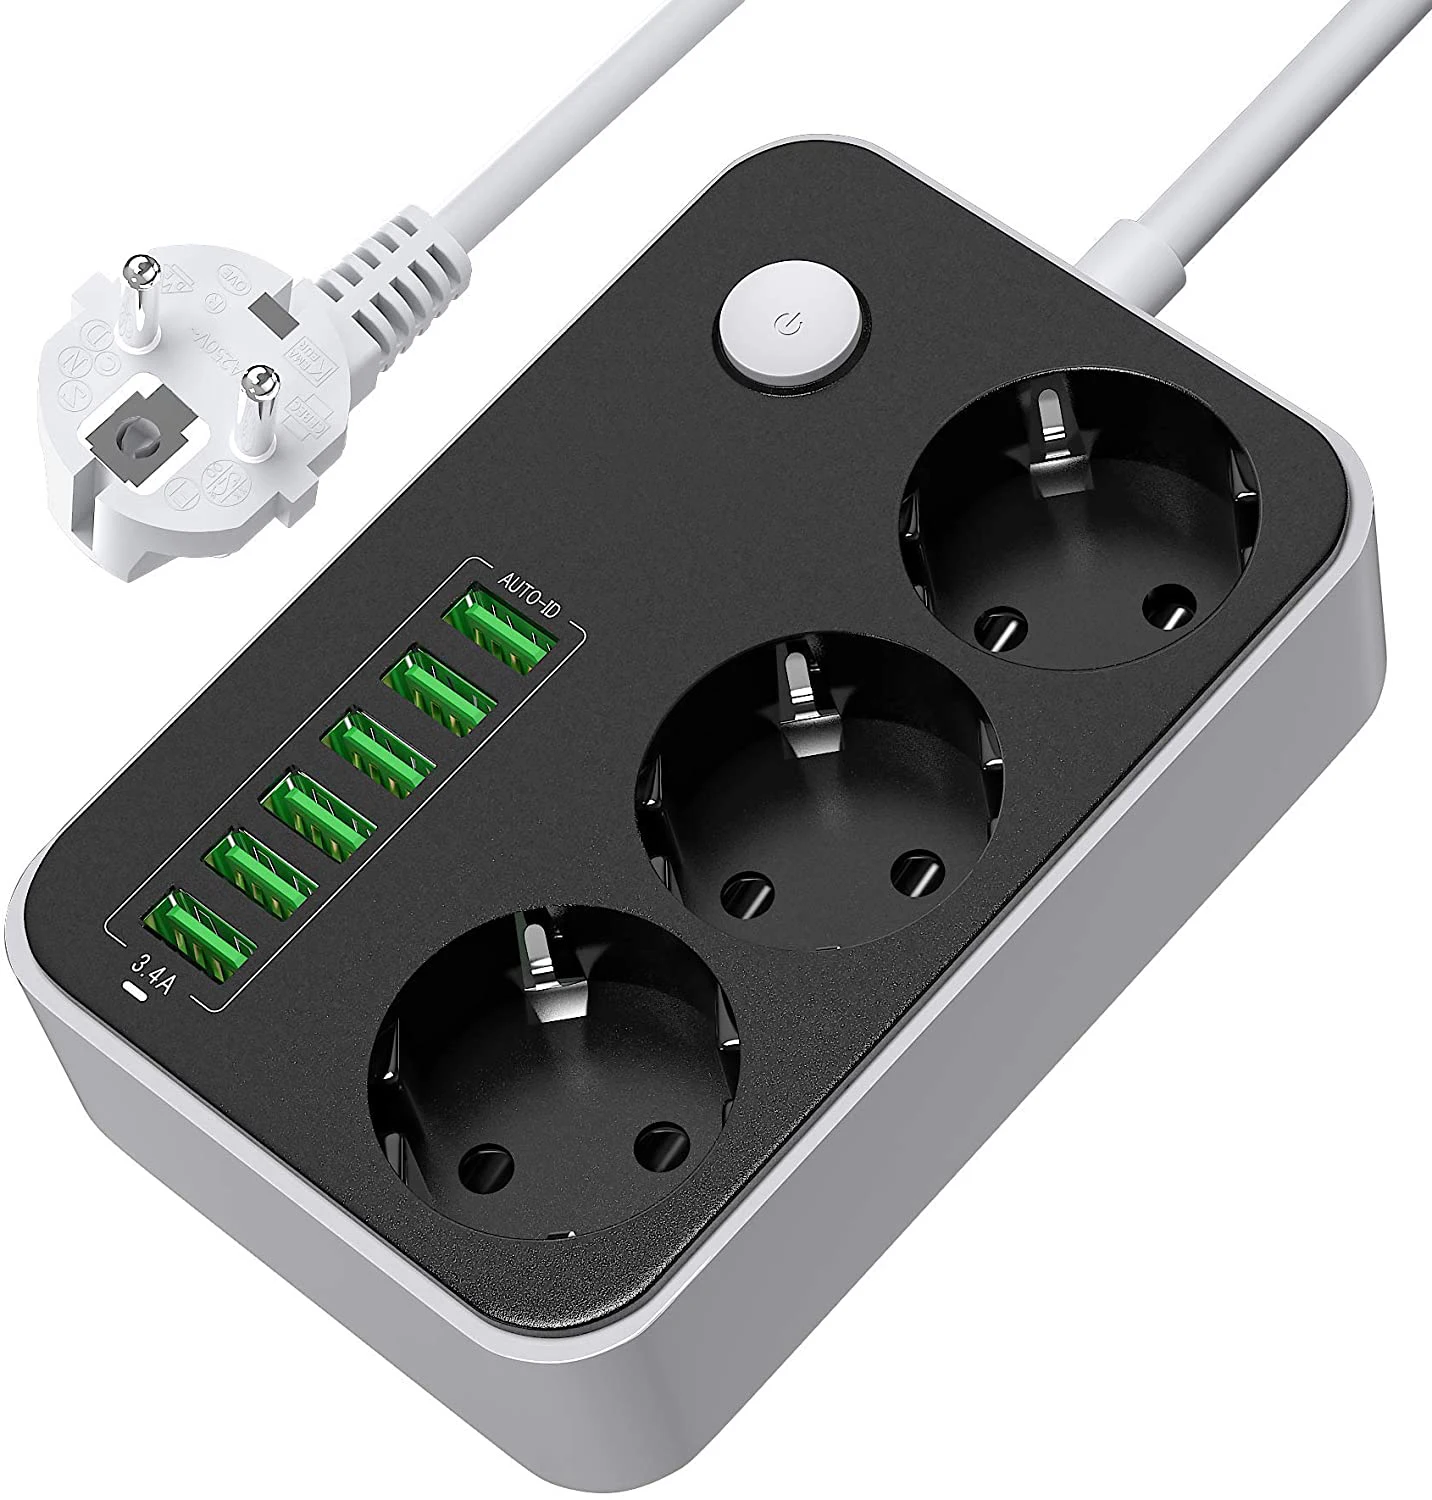 UK Power Strips with USB ports 3 Way Outlets 6 USB Ports Power Socket/Smart USB Charger Power UK Socket